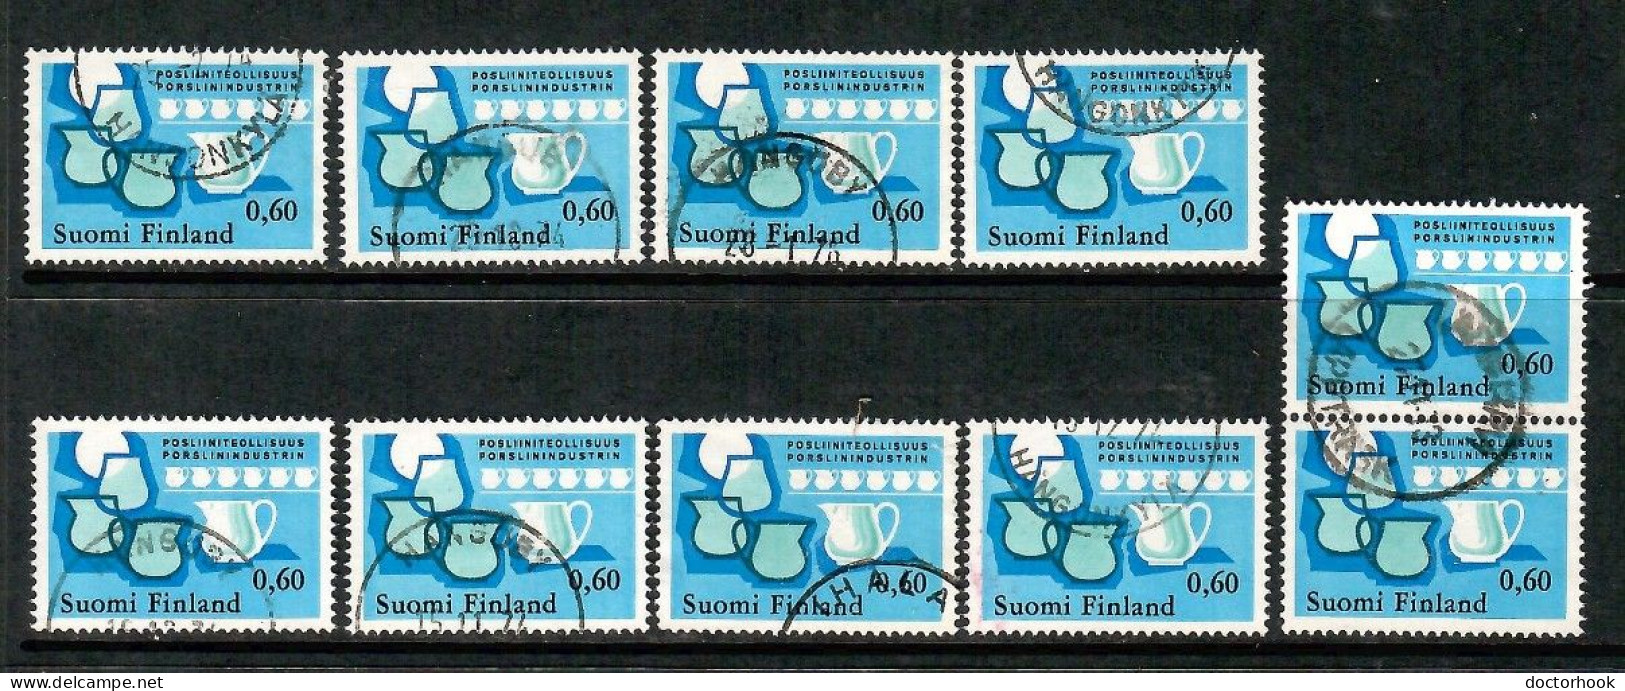 FINLAND   Scott # 541 USED WHOLESALE LOT OF 10 (CONDITION AS PER SCAN) (WH-631) - Sammlungen